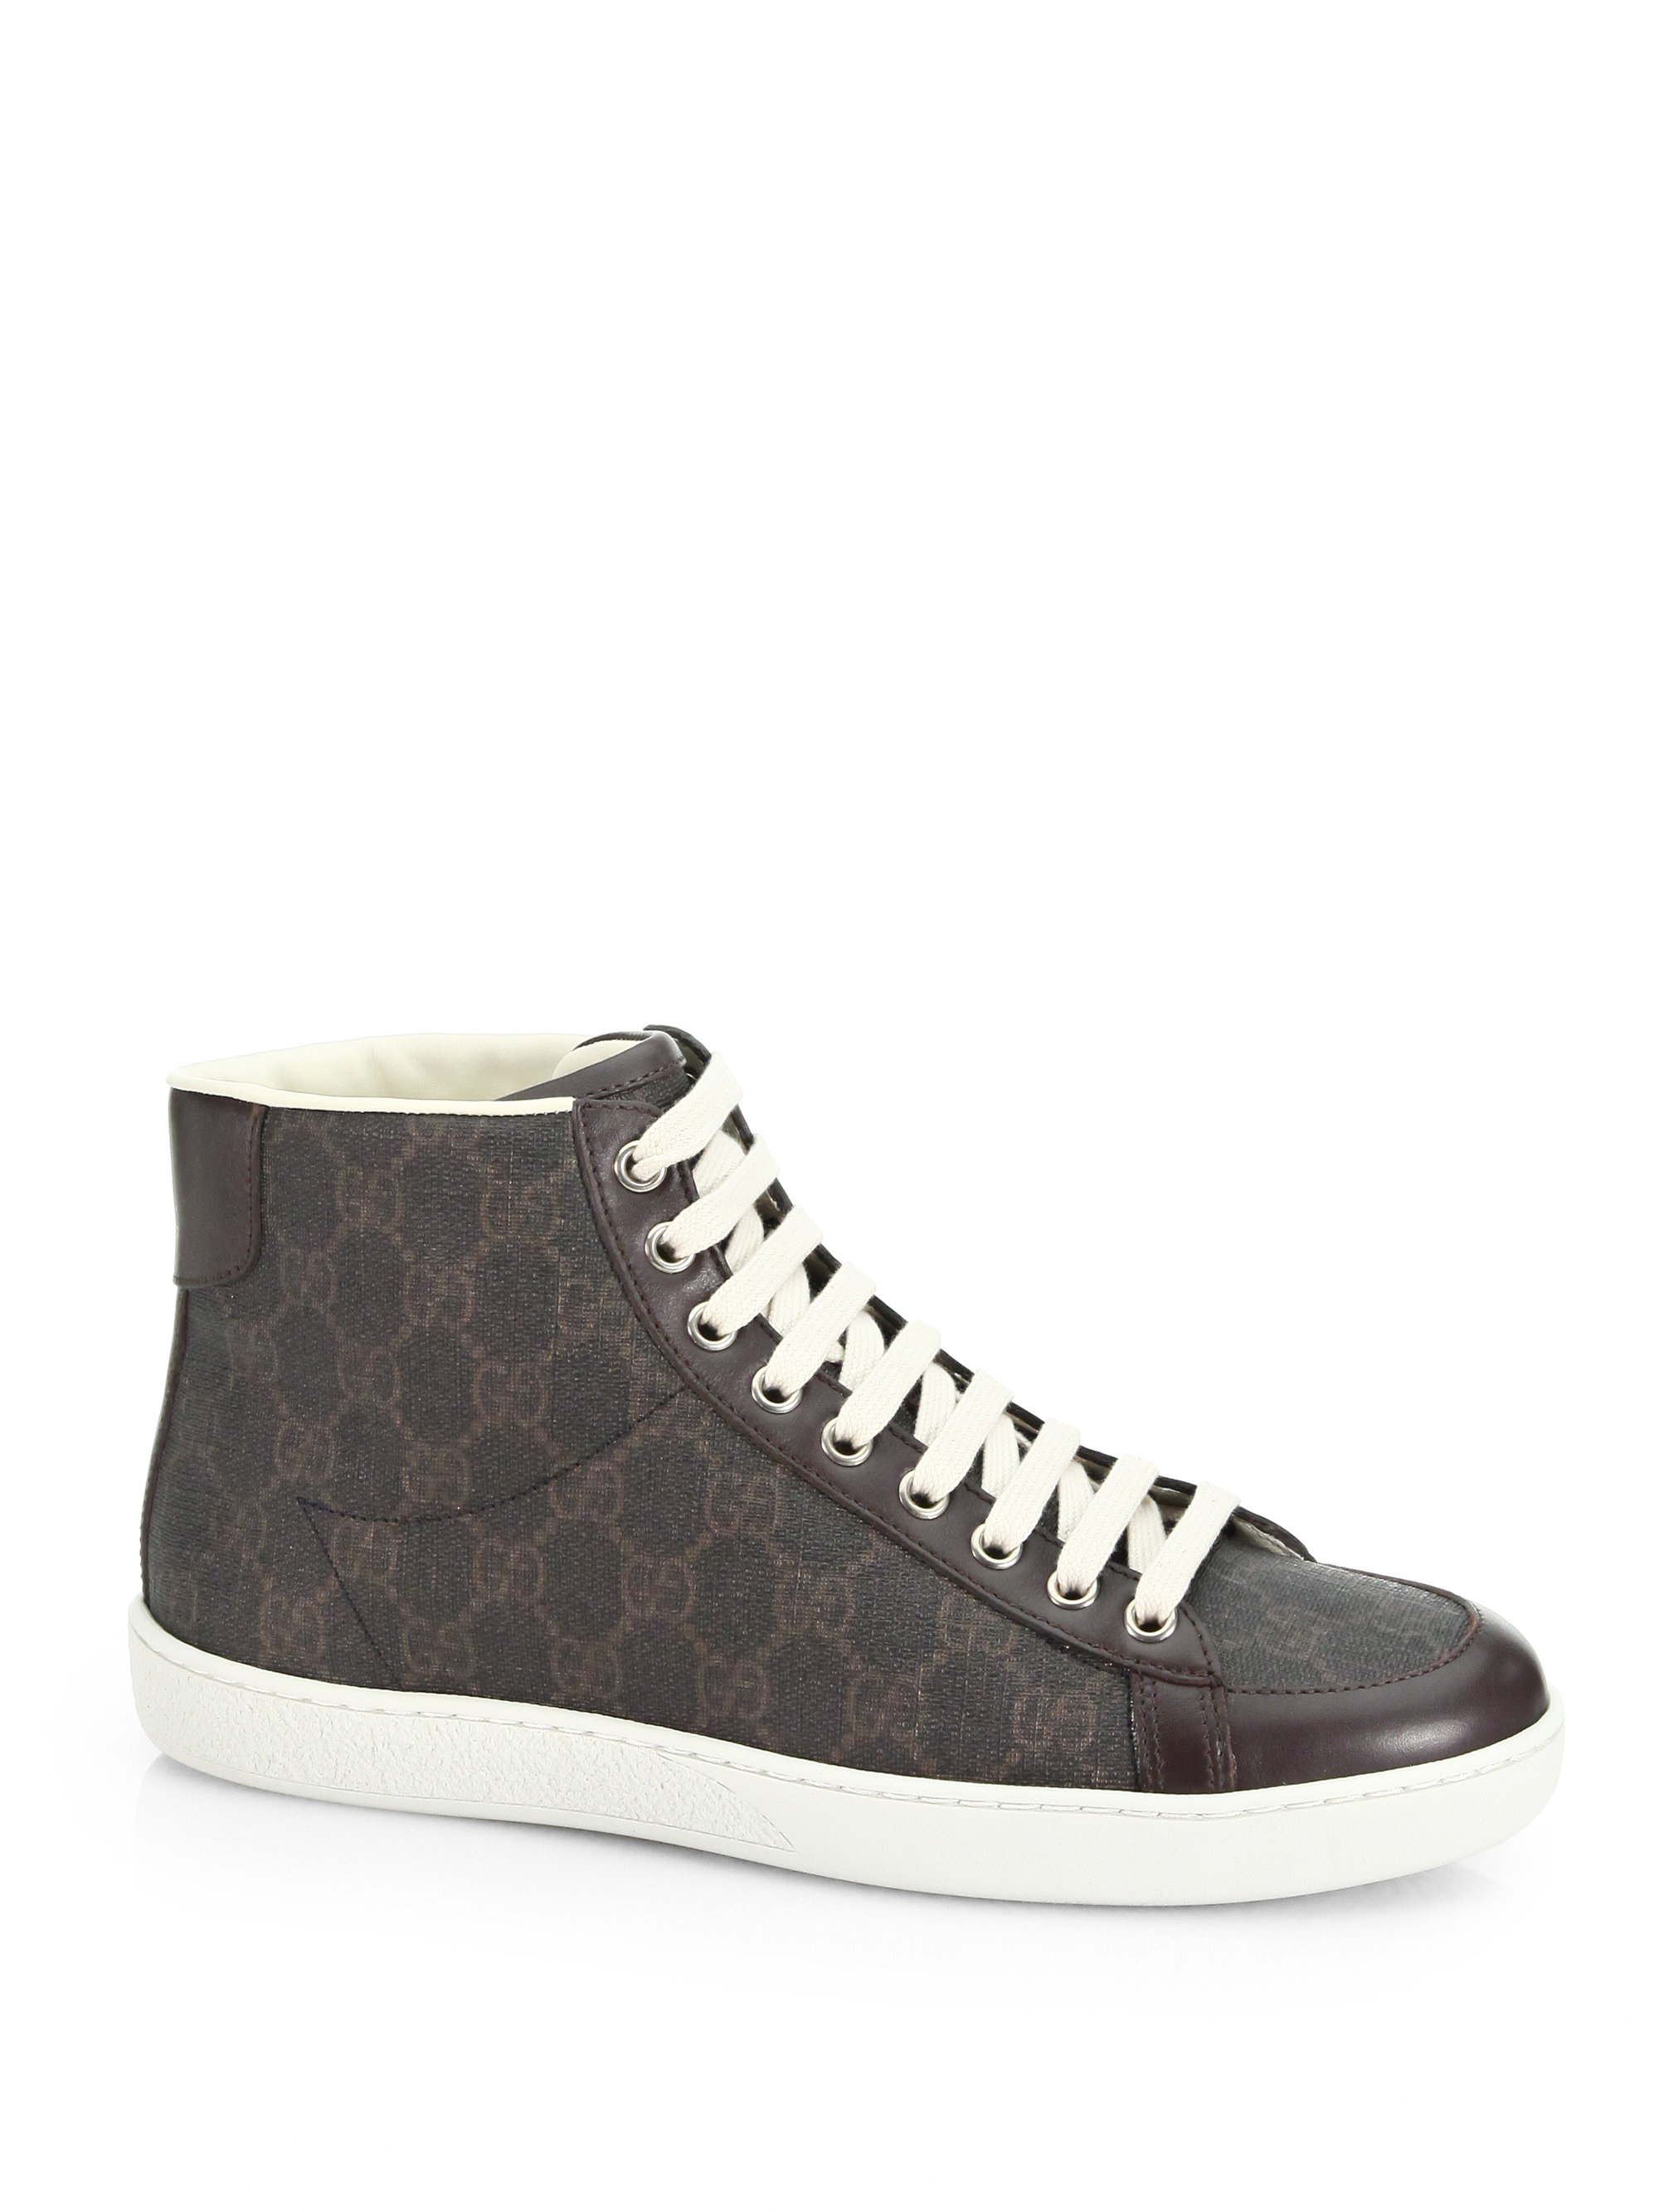 Gucci Gg Canvas Leather Hightop Sneakers in Gray (BLACK) | Lyst